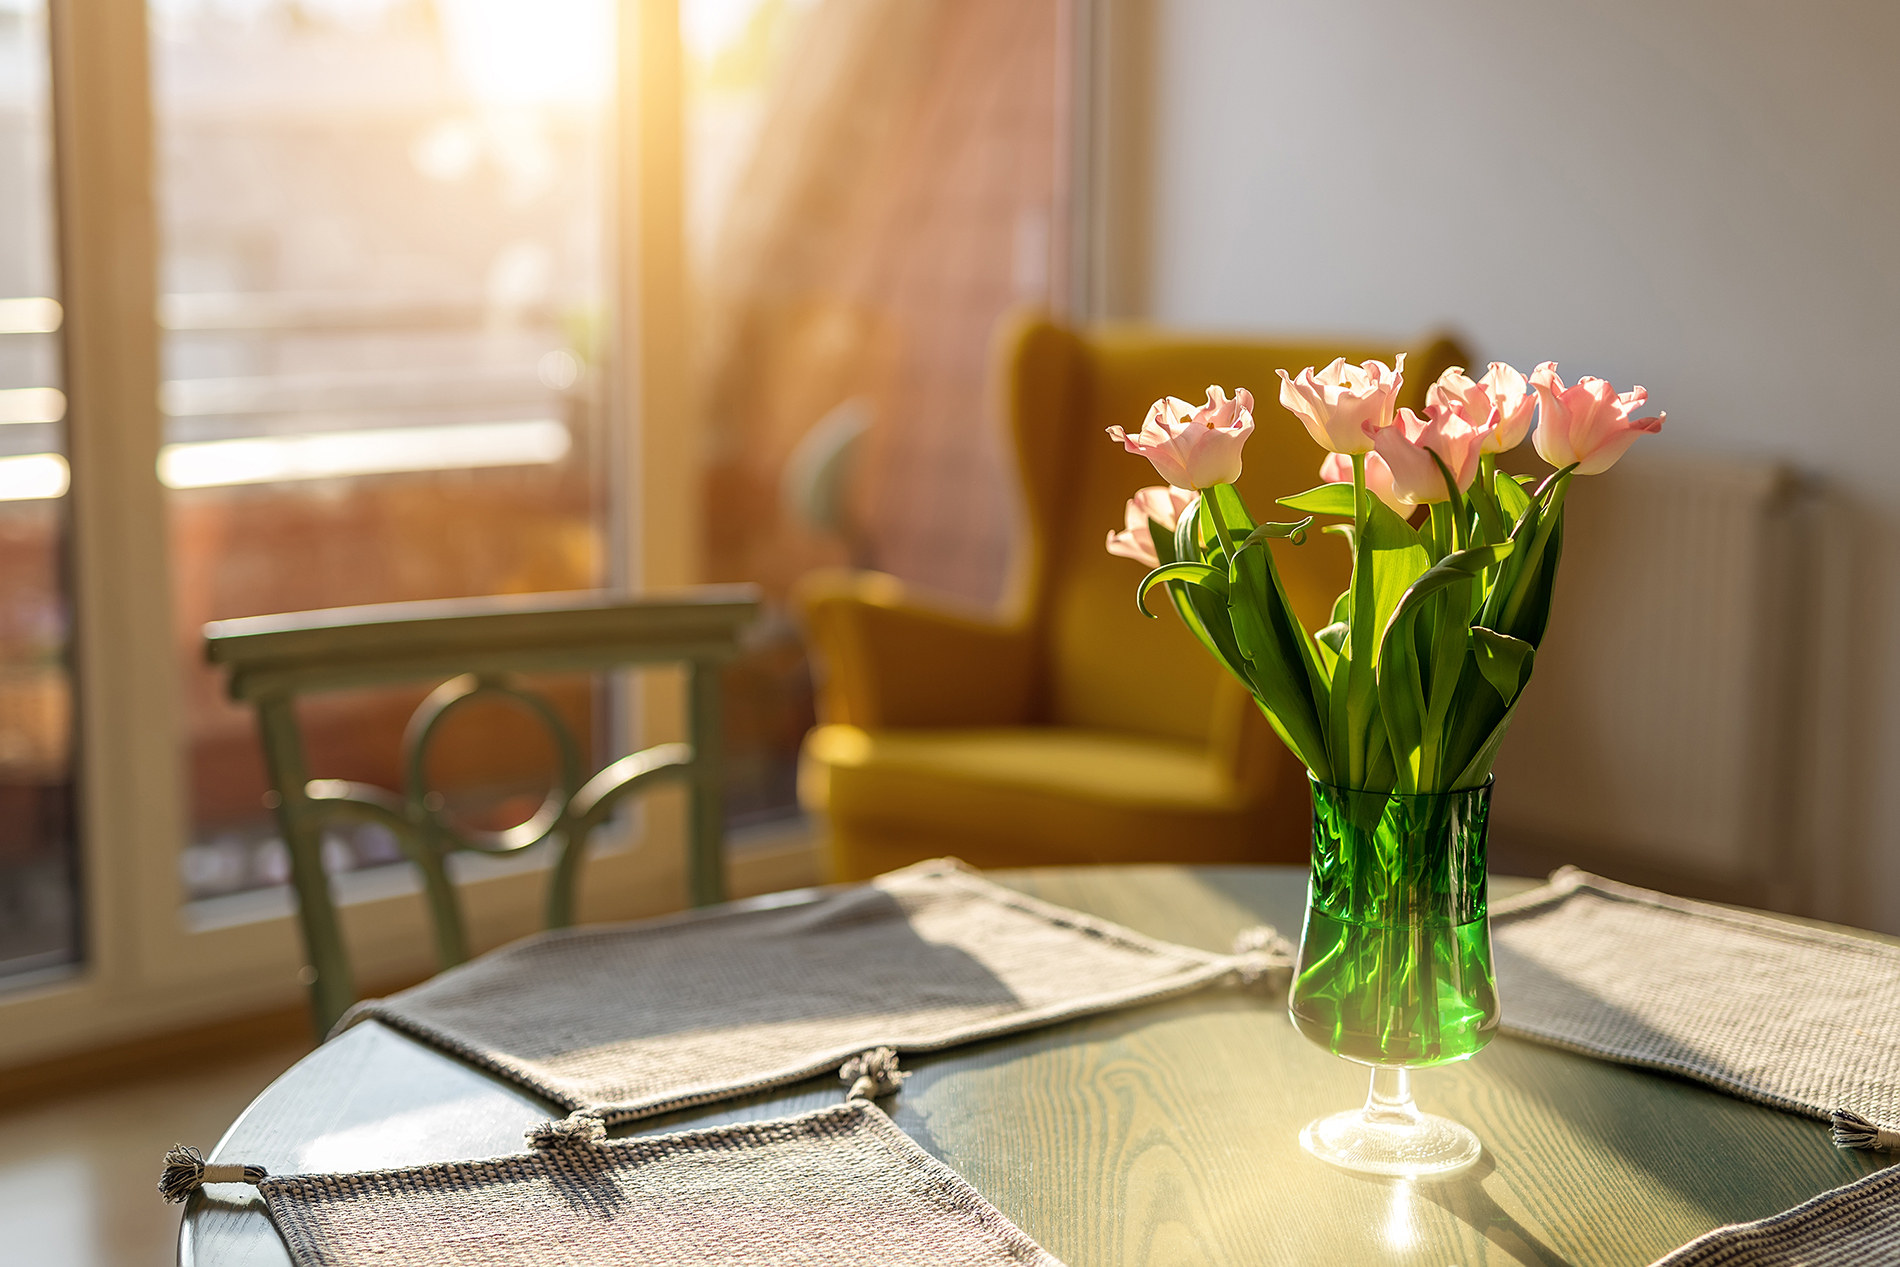 Beautiful fresh pink tulips bouquet in green glass vase on table in warm sunset sun lights against balcony window in cozy home interior. Blooming flowers decoration in living room provence style.